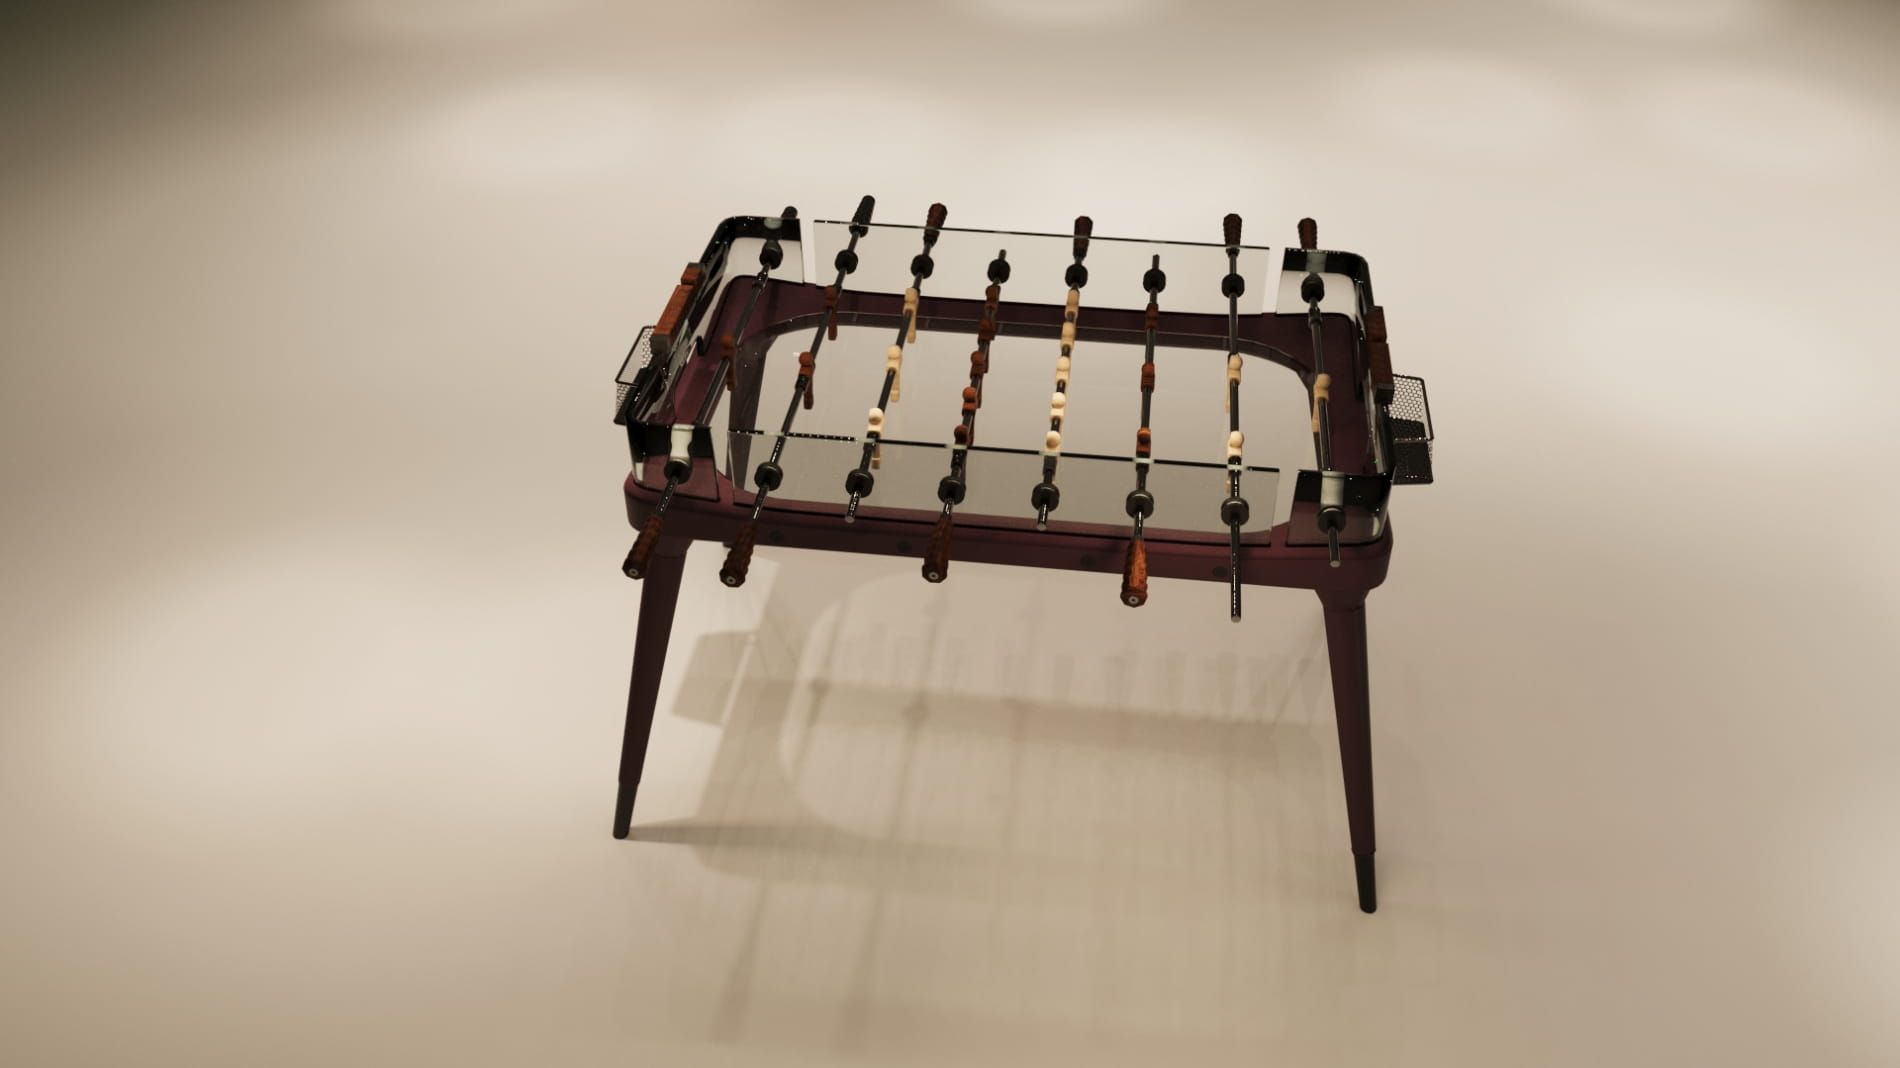 3d-model-of-a-foosball-table-